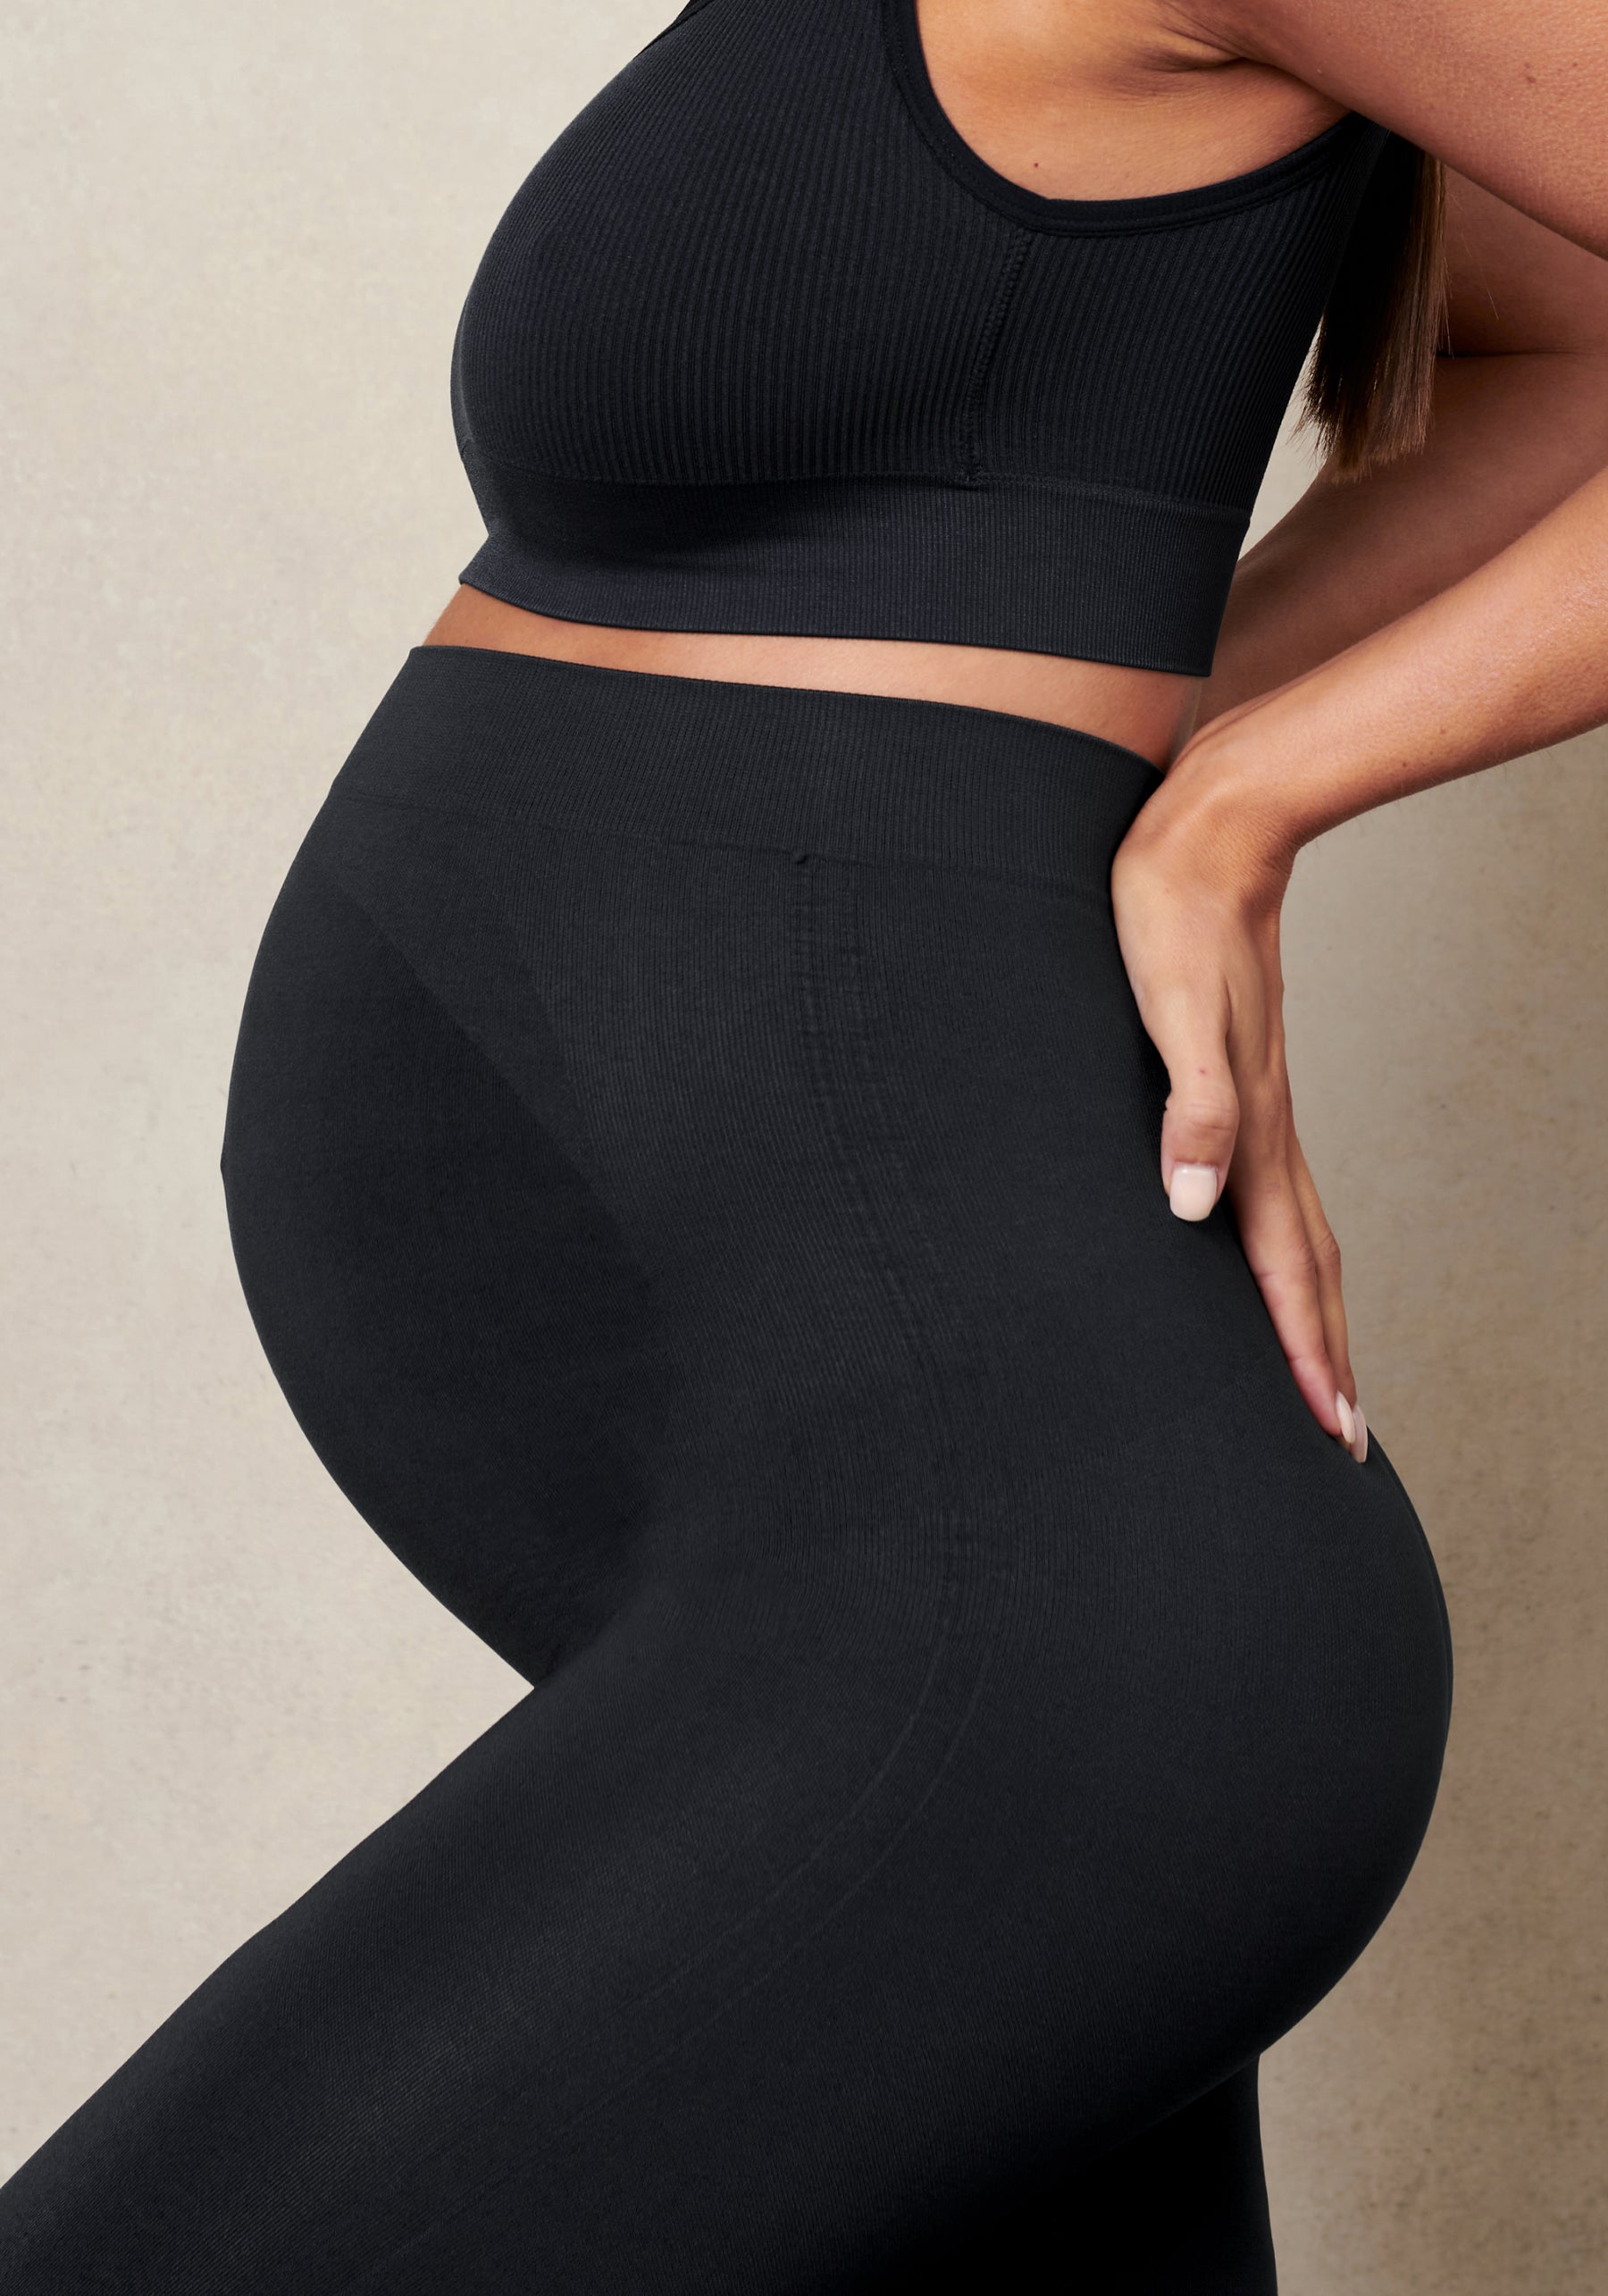 BLANQI® Everyday™ Maternity Belly Support Leggings, leggings maternité